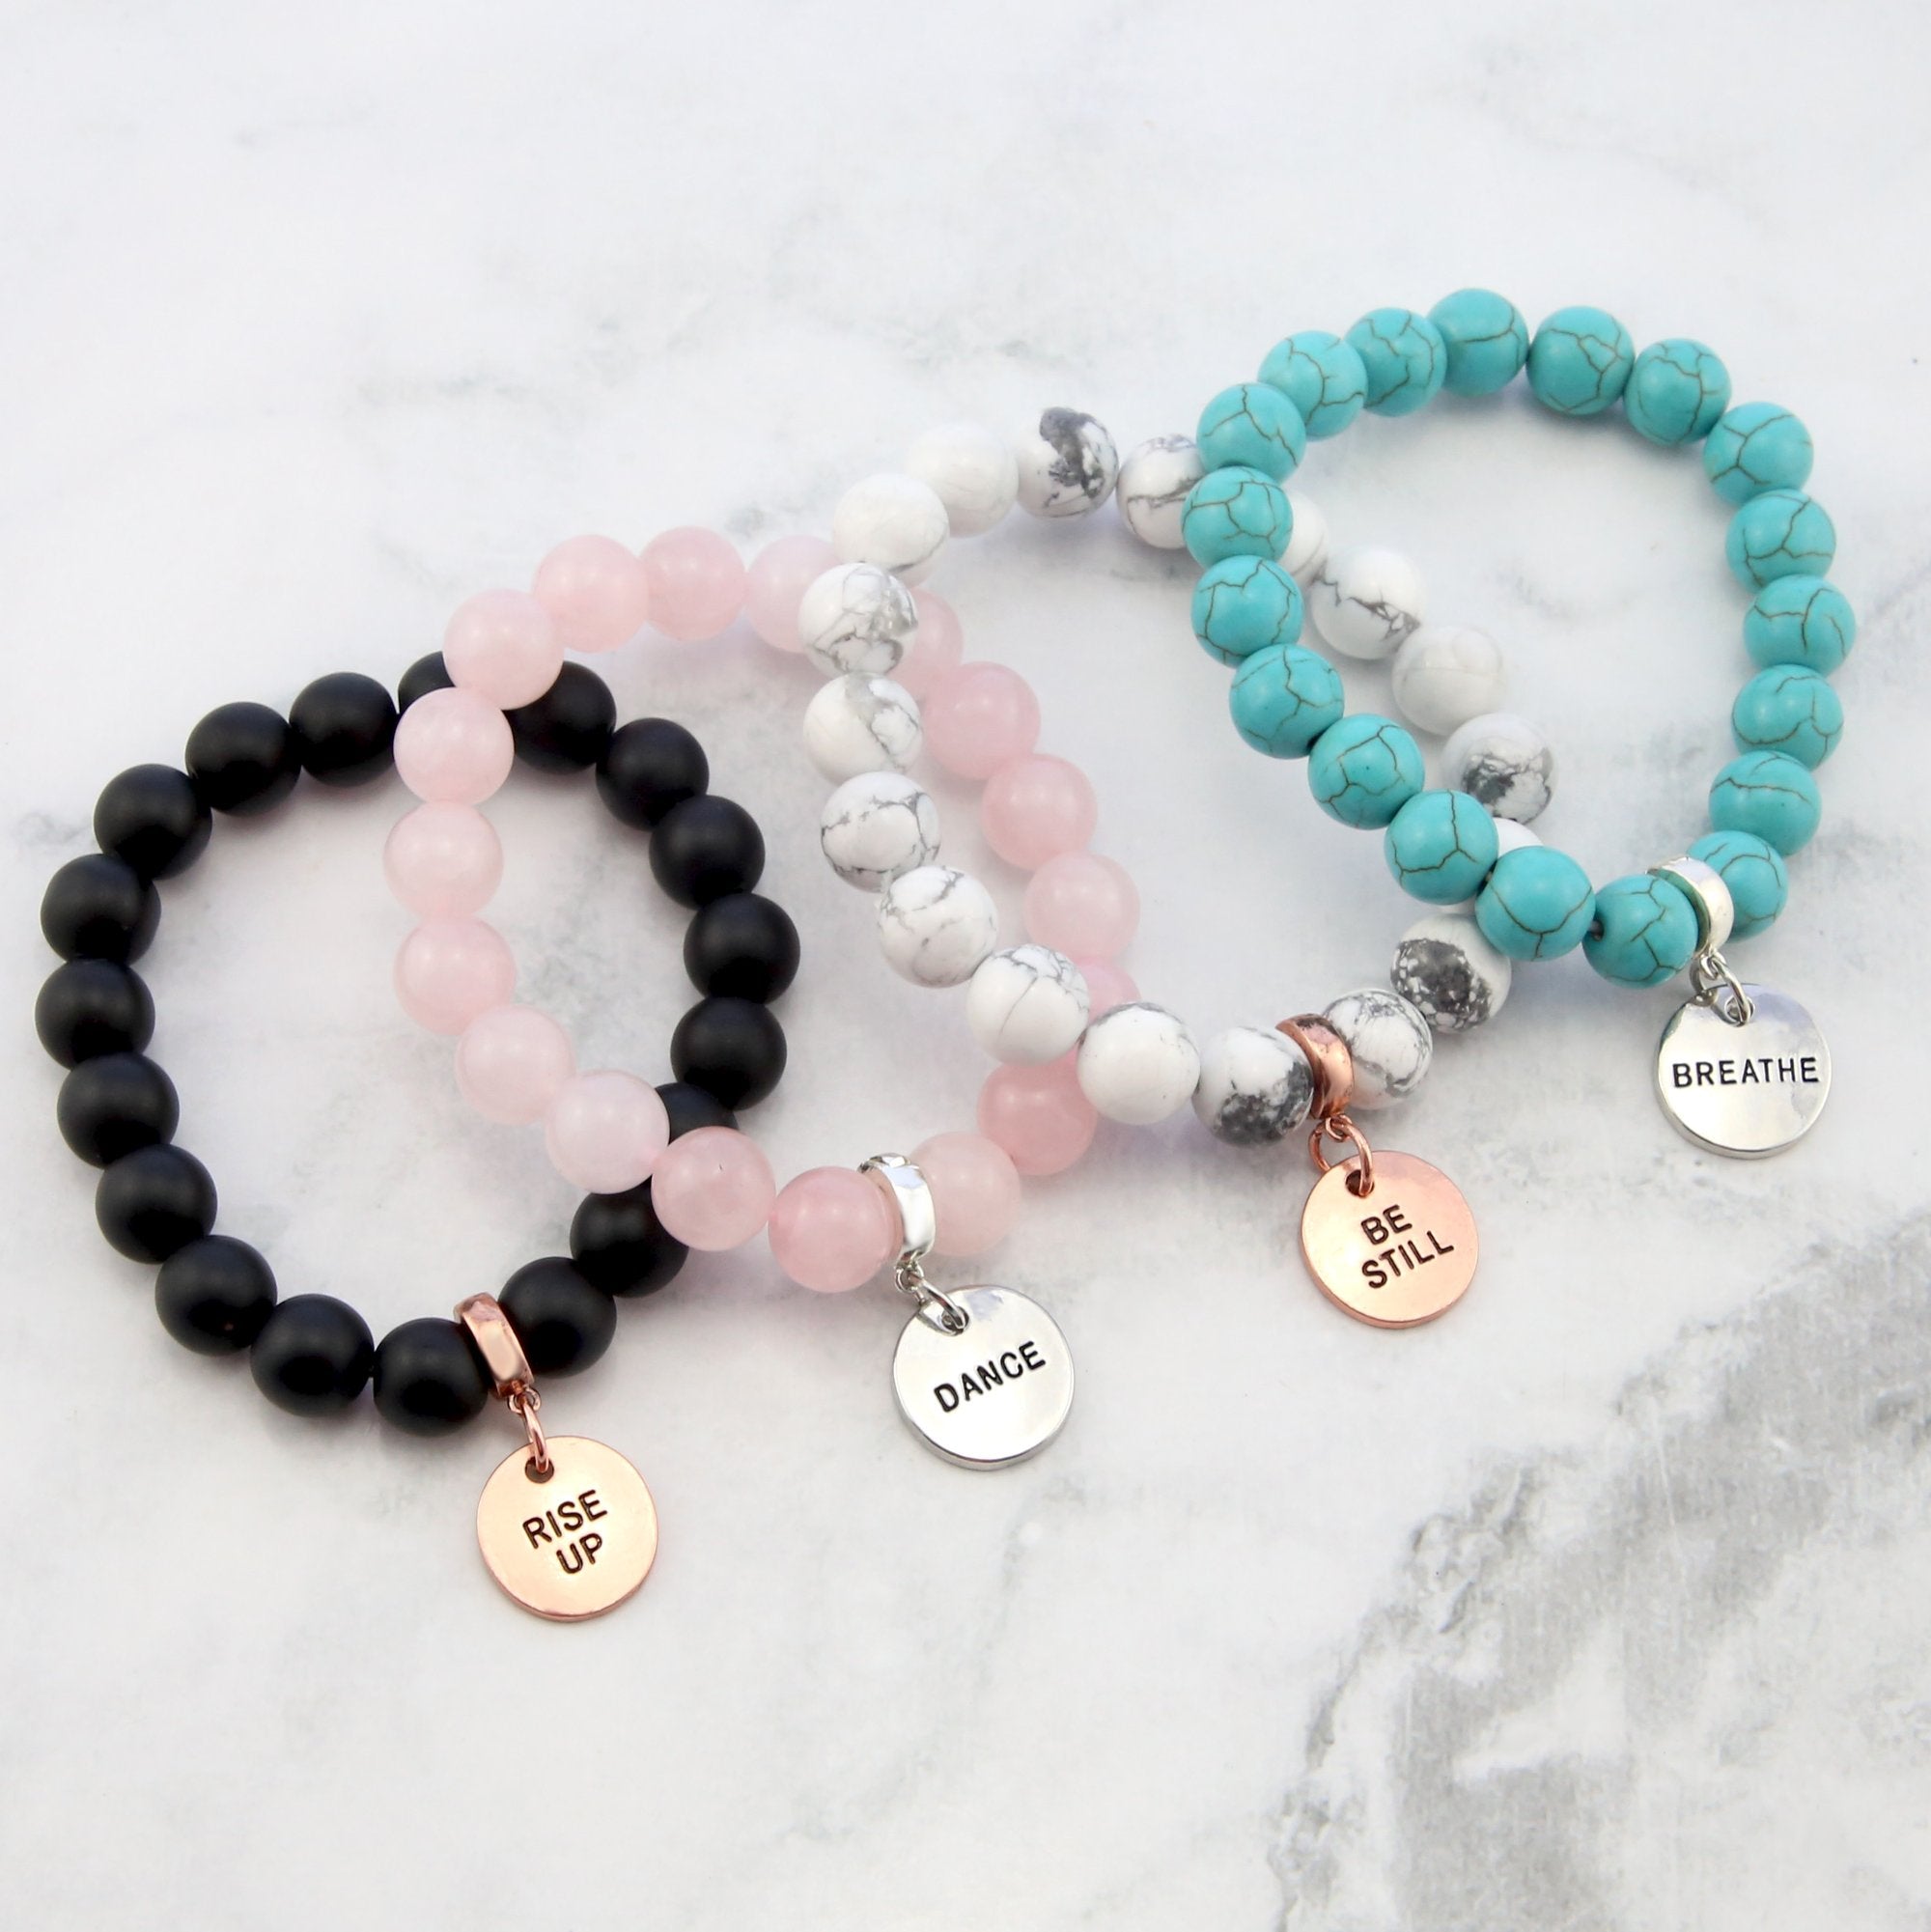 23 Inspirational Bracelets And Bangles With Meaningful Words in 2023  A  Fashion Blog